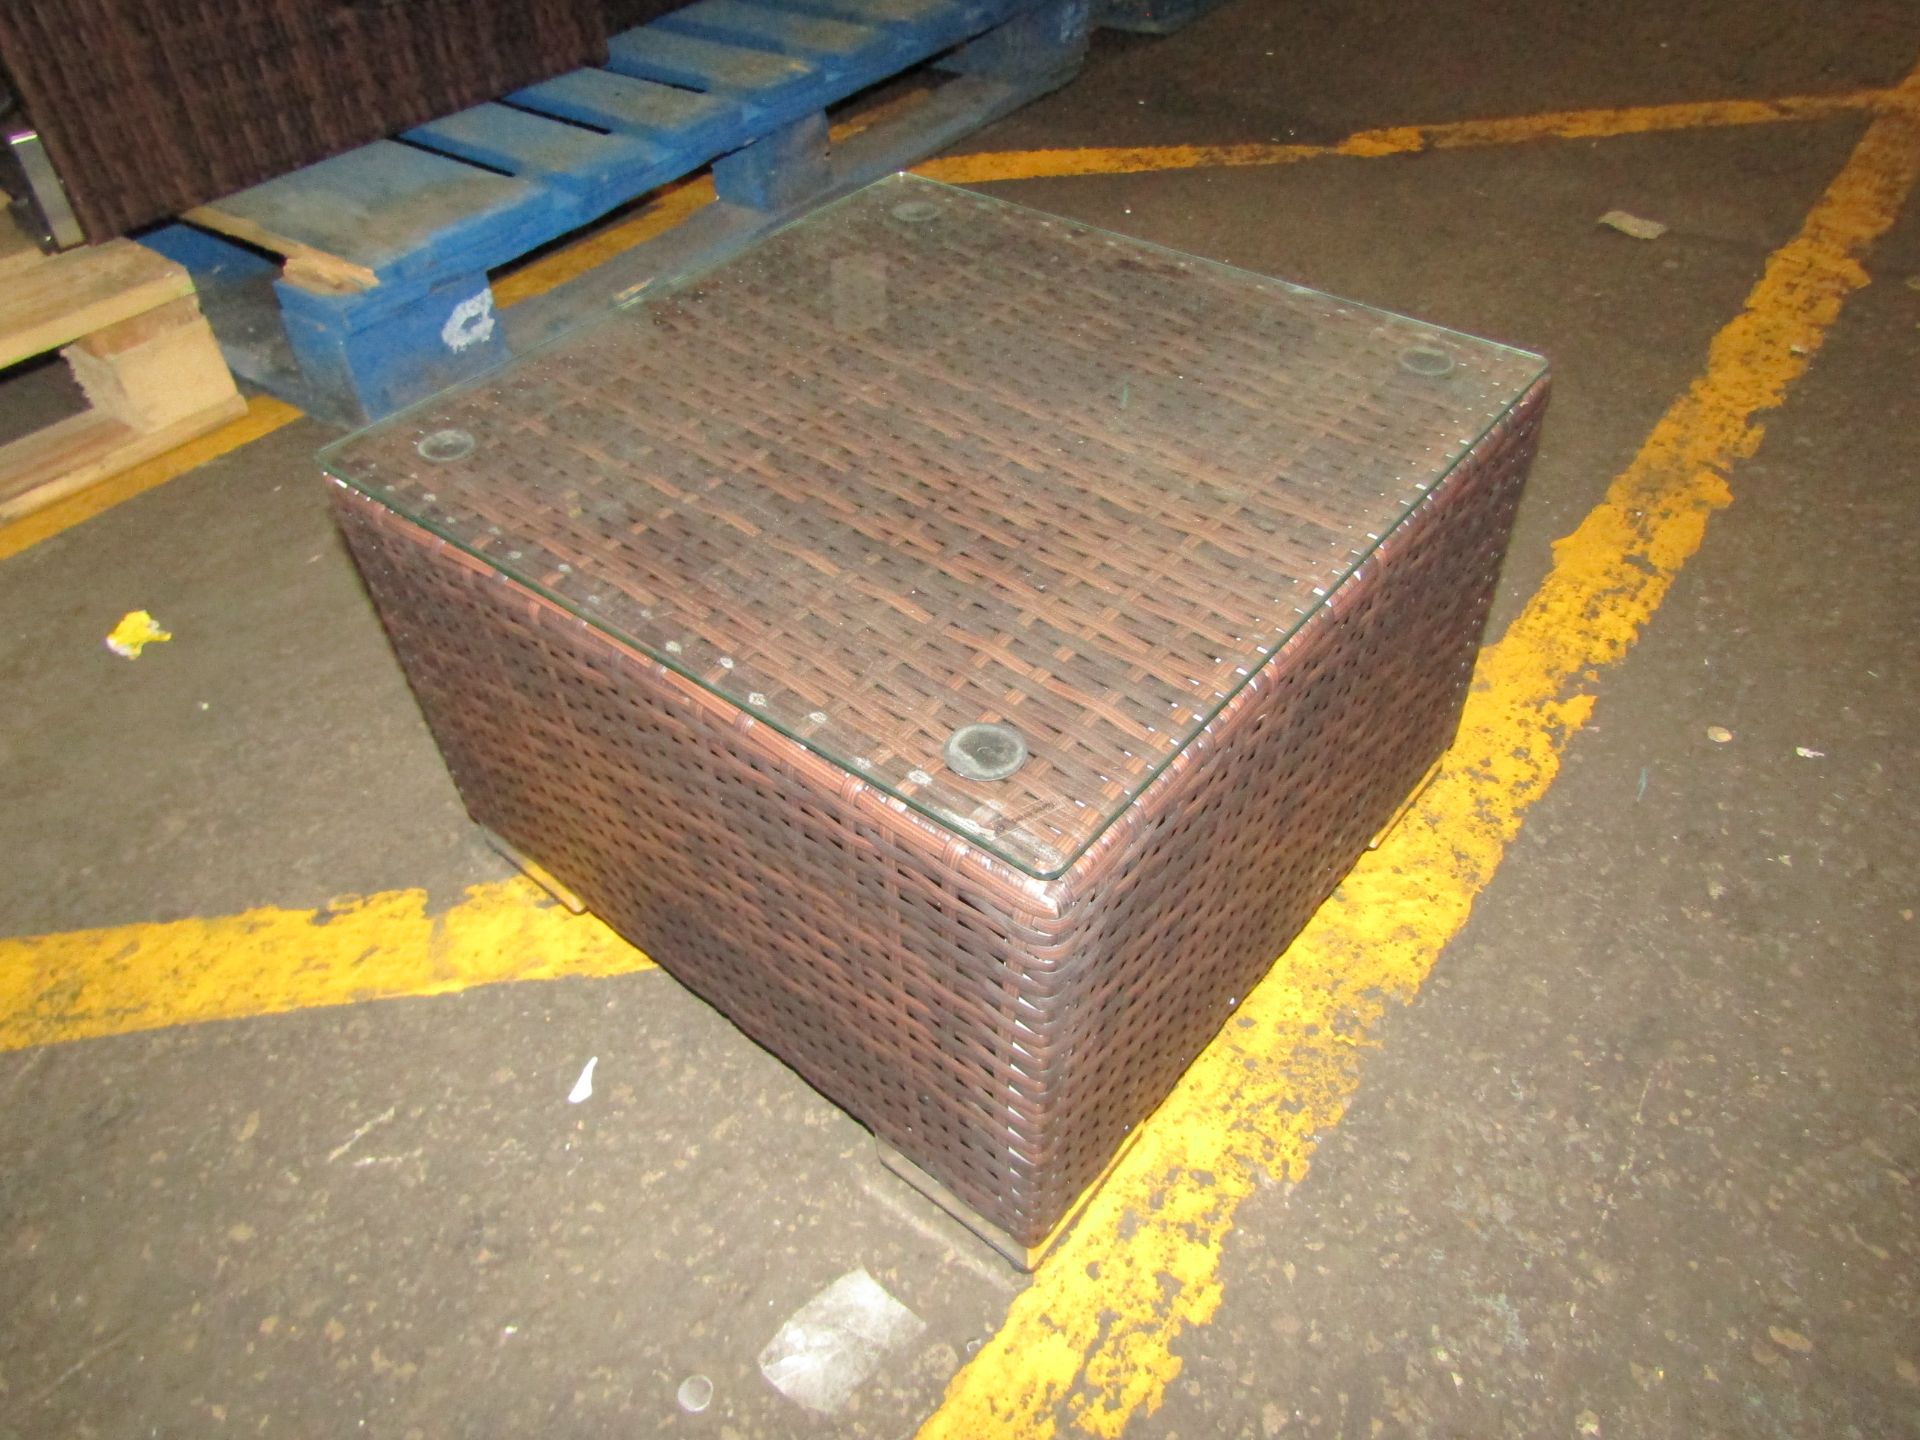 Rattan Direct Small Square Rattan Garden Side Table in Chocolate Mix RRP 249.00Our rattan side